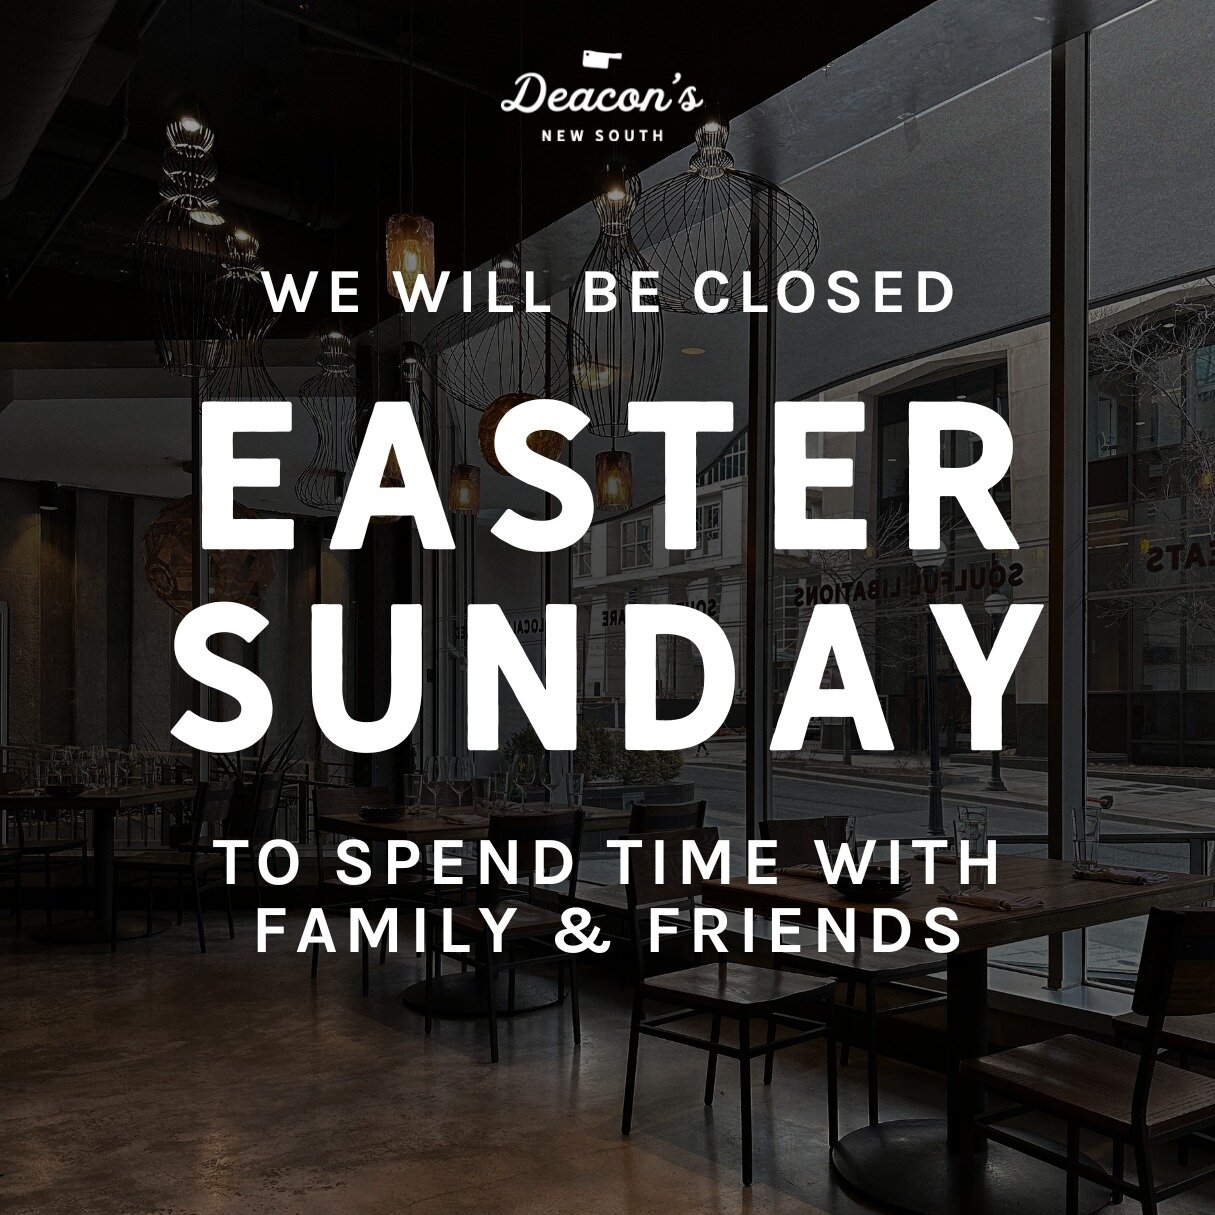 🐰🌷 In the spirit of Easter, our restaurant will be closed on Easter Sunday to allow our hardworking staff to spend precious time with their loved ones. 🐣💕 

We wish you all a joyous and blessed Easter weekend filled with love, laughter, and plent